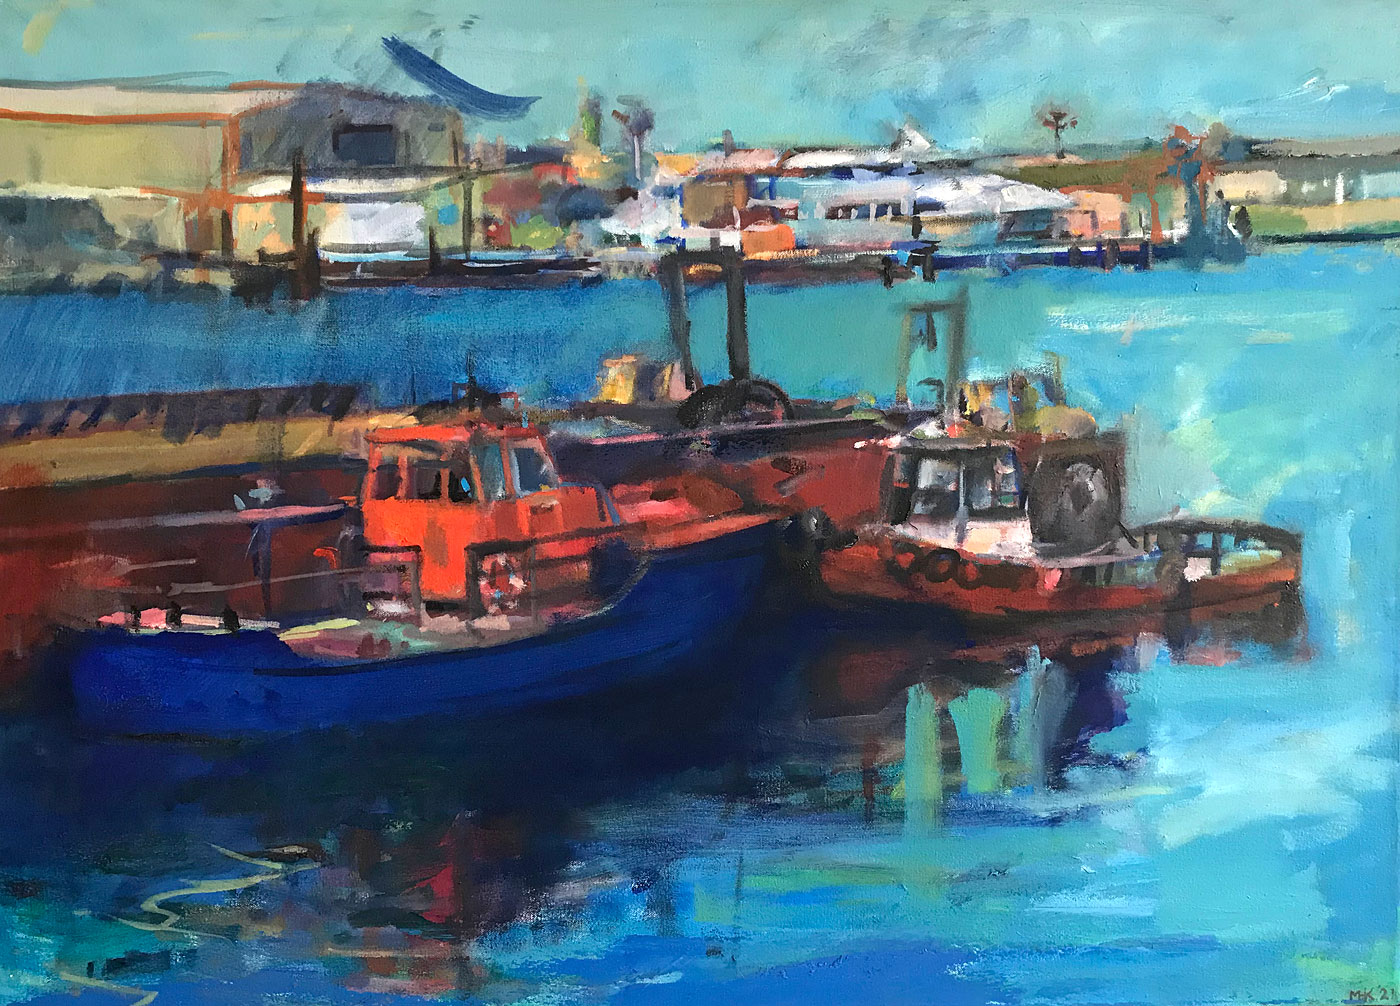 Fremantle Tugboats, "Old Friends", by Michael Knight, Australia